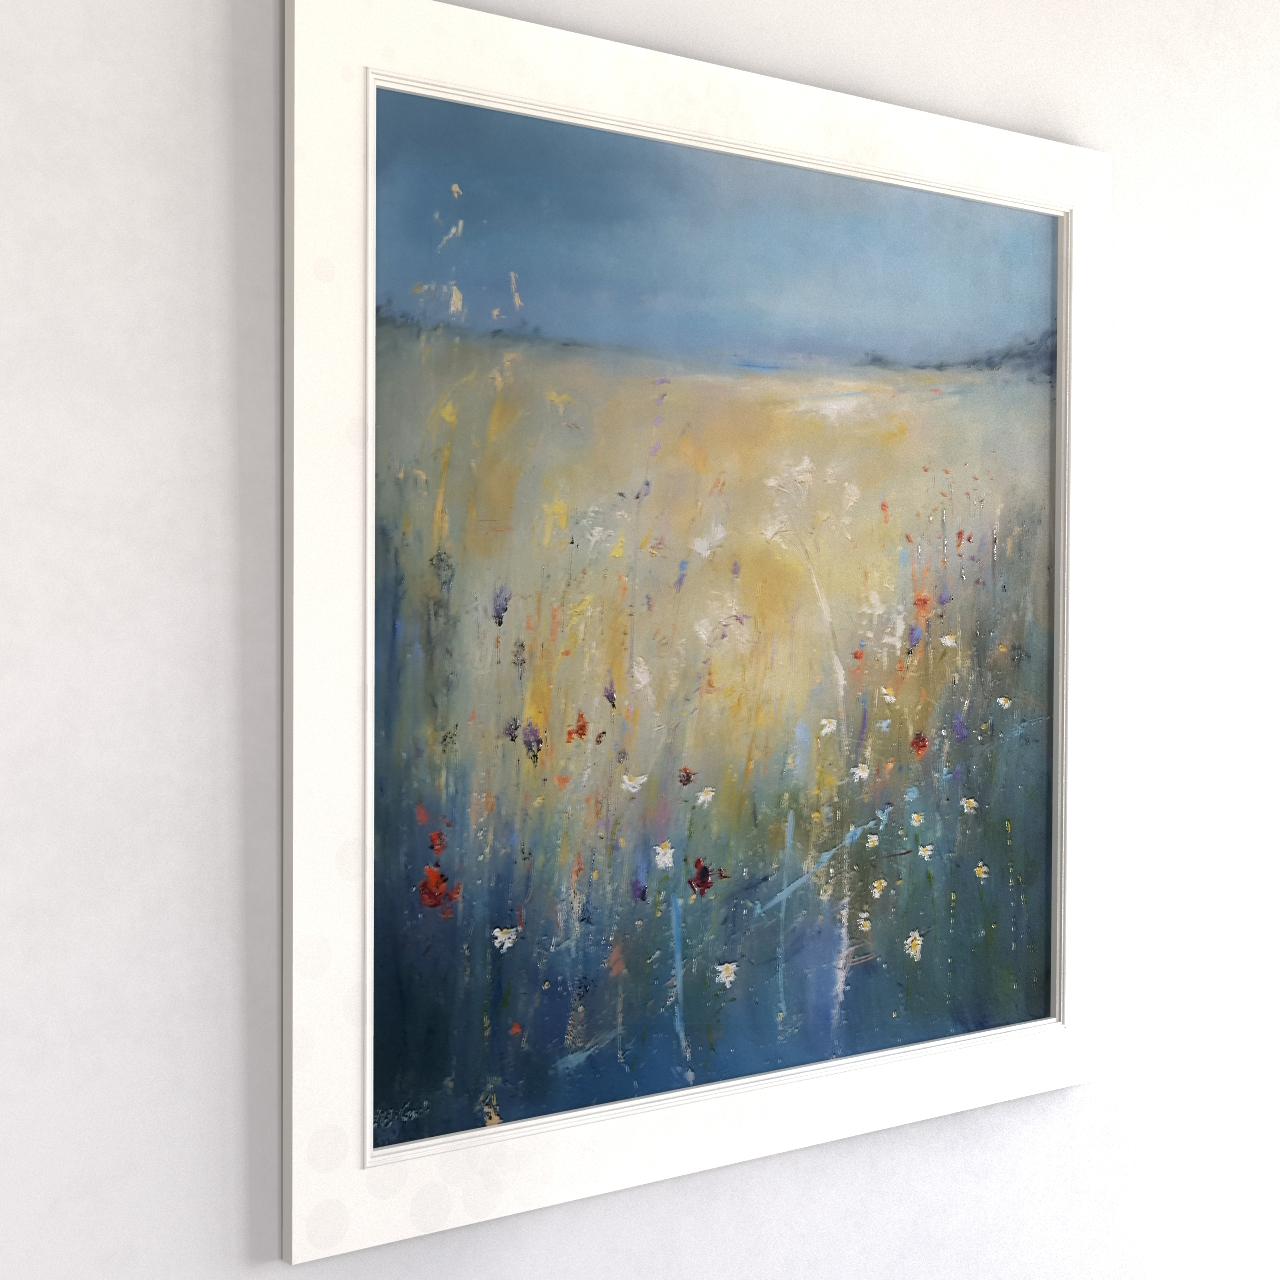 Libbi Gooch
Wild Edge
Original Abstract Landscape Painting
Oil on Board
Image Size: 80 cm x 80 cm x .5 cm
Framed Size: 93 cm x 93 cm x 1.8 cm
Sold Framed
Free Shipping
Please note that in situ images are purely an indication of how a piece may